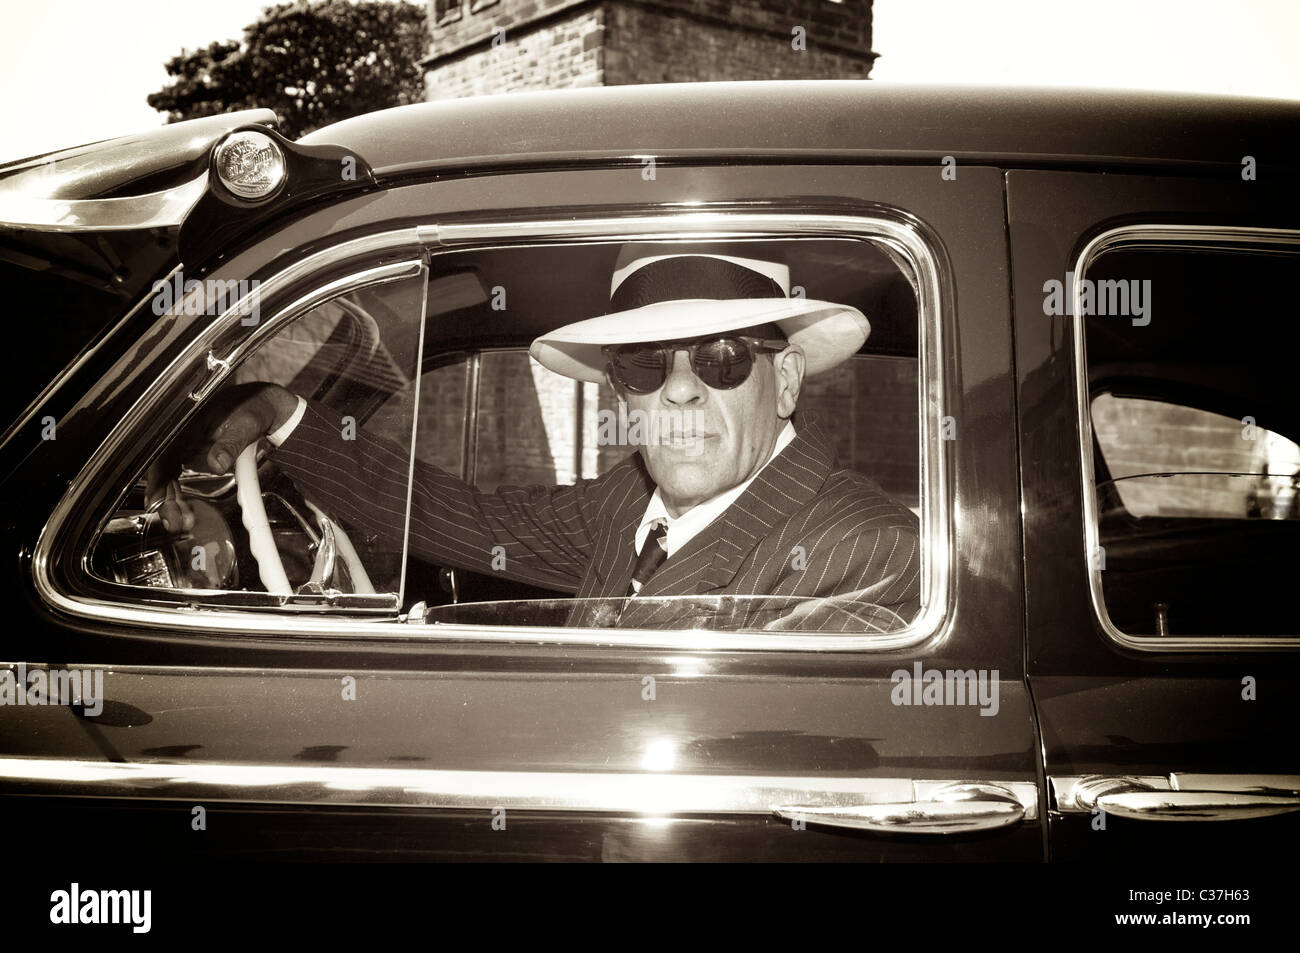 1940s style US government agent in 1942 Chrysler New Yorker car Stock Photo